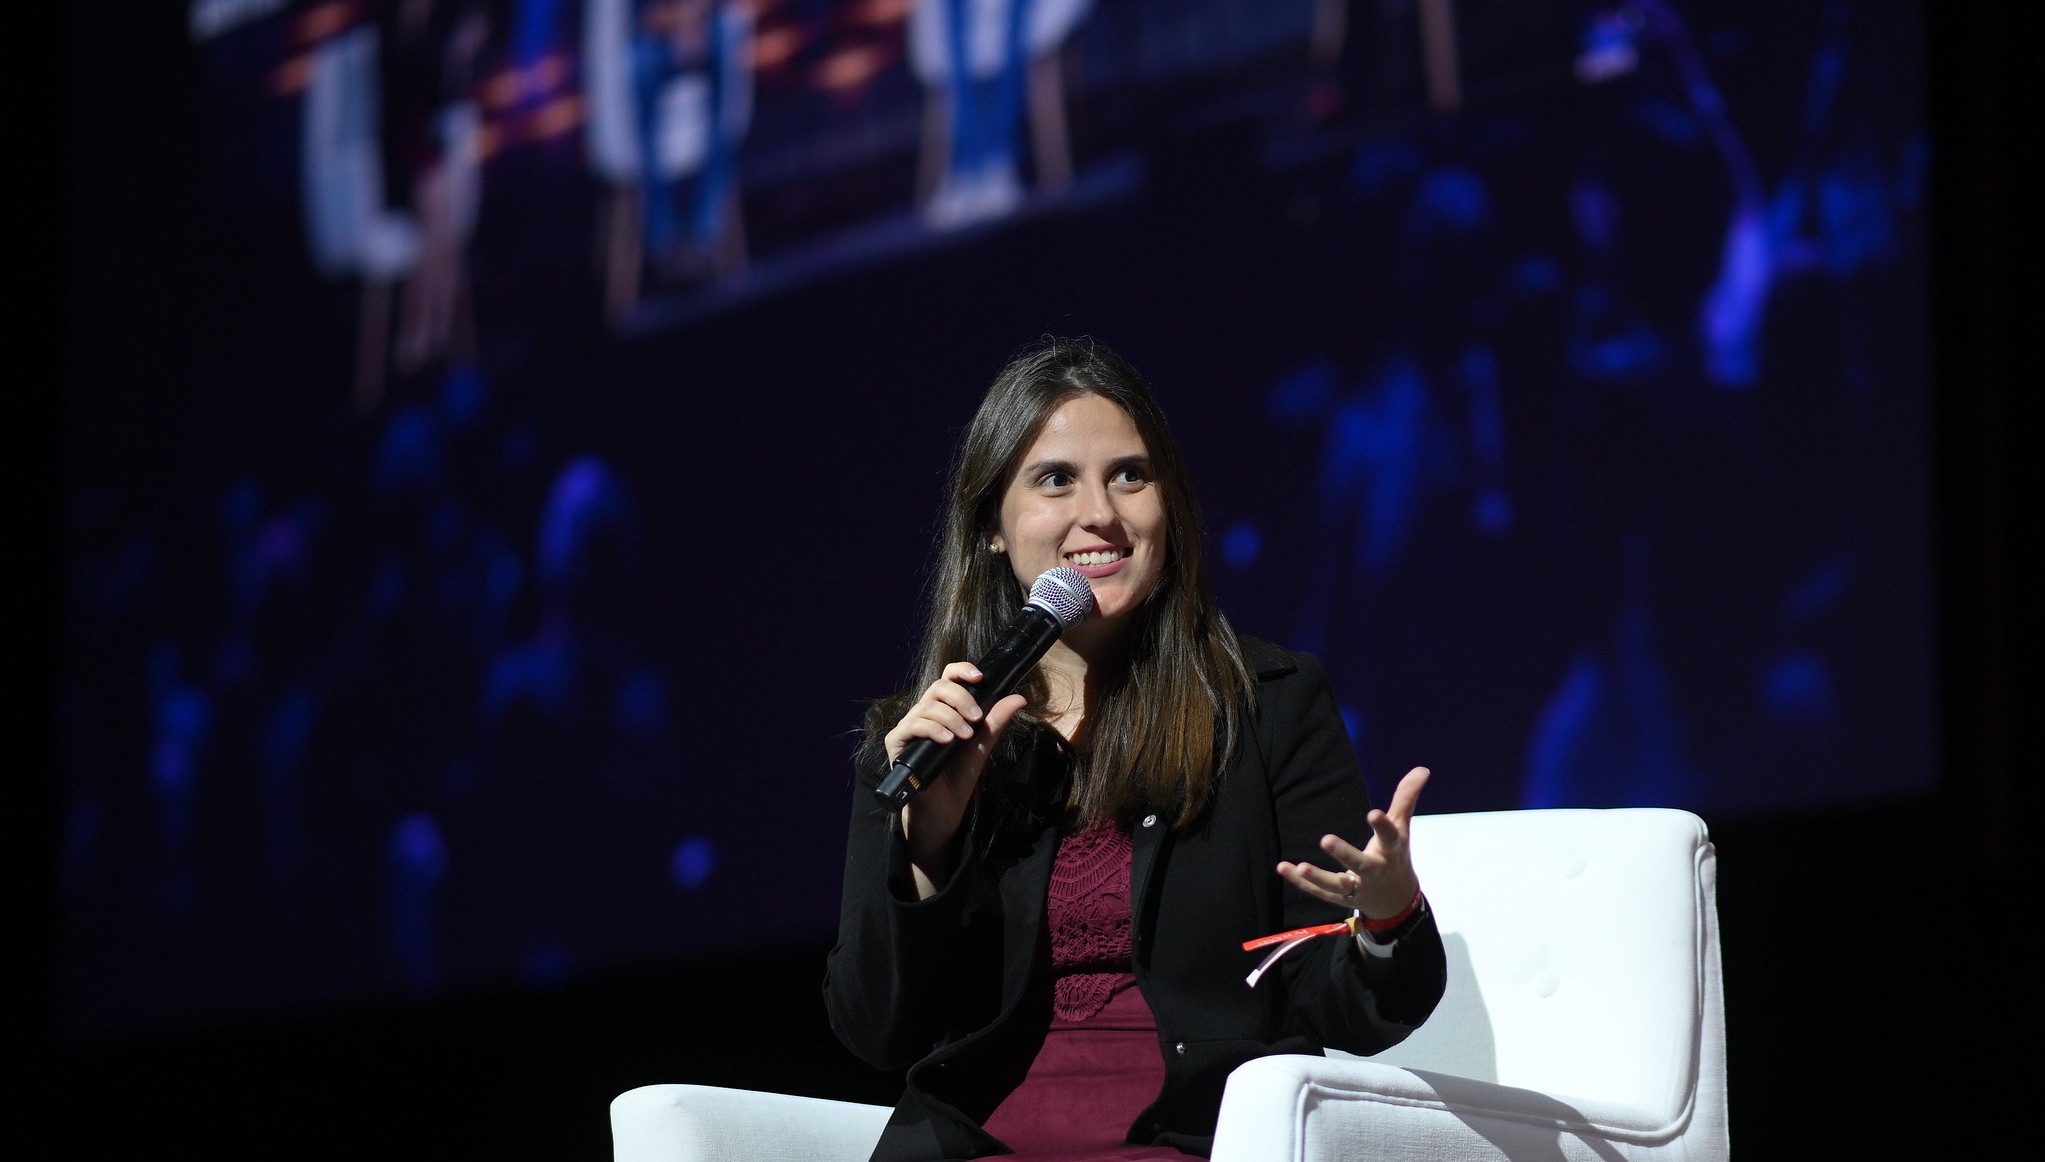 A photo of a person (Mariana Vasconcelos, co-founder and CEO of Agrosmart) speaking on stage at Web Summit. The person is sitting on a chair and holding a microphone.